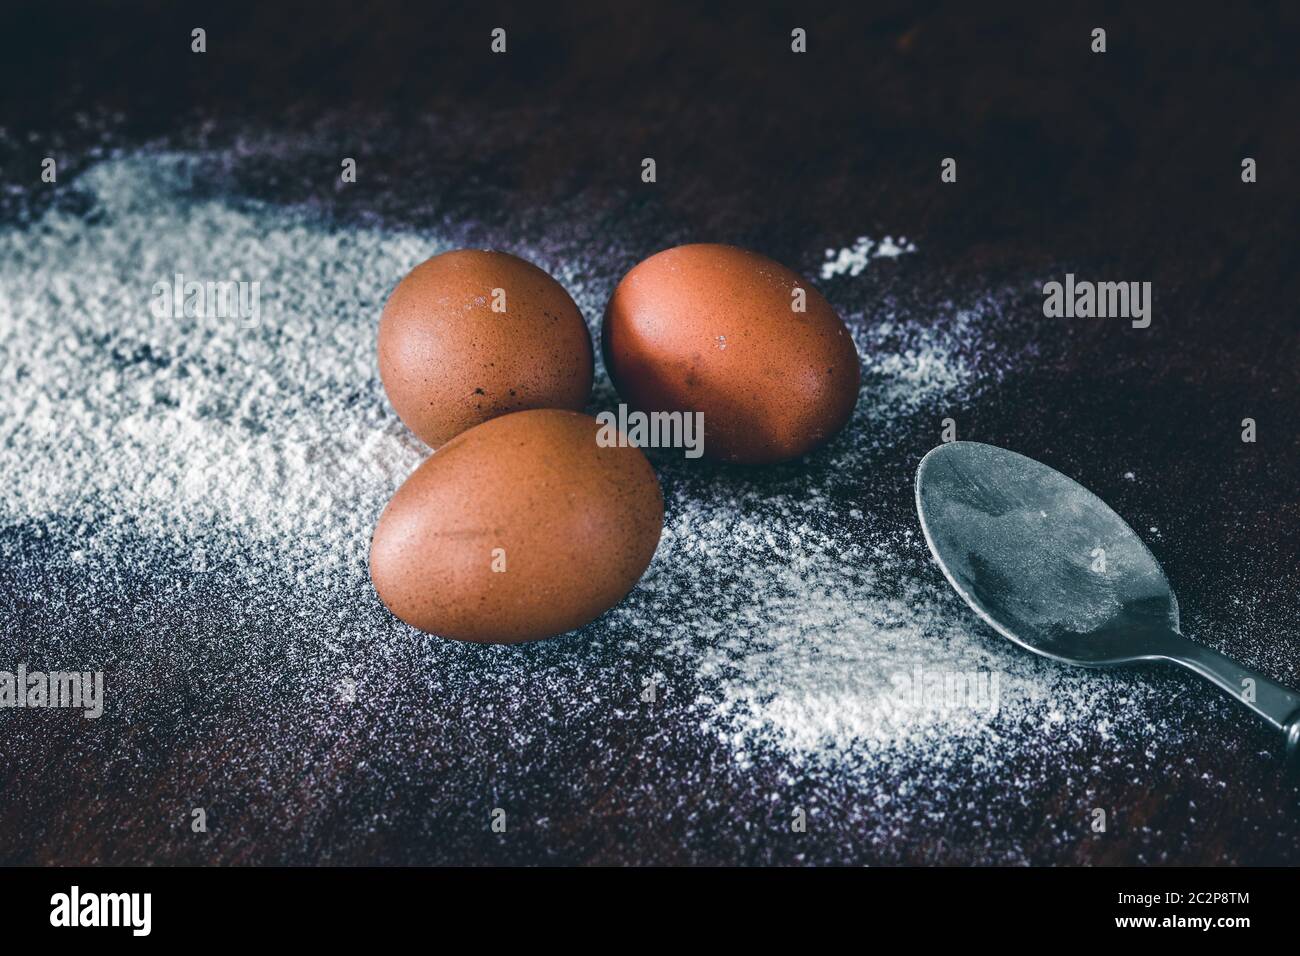 Conceptual still life photo of eggs and flour spilled on a table to show concept of baking as a way to support mental health and coping during home qu Stock Photo